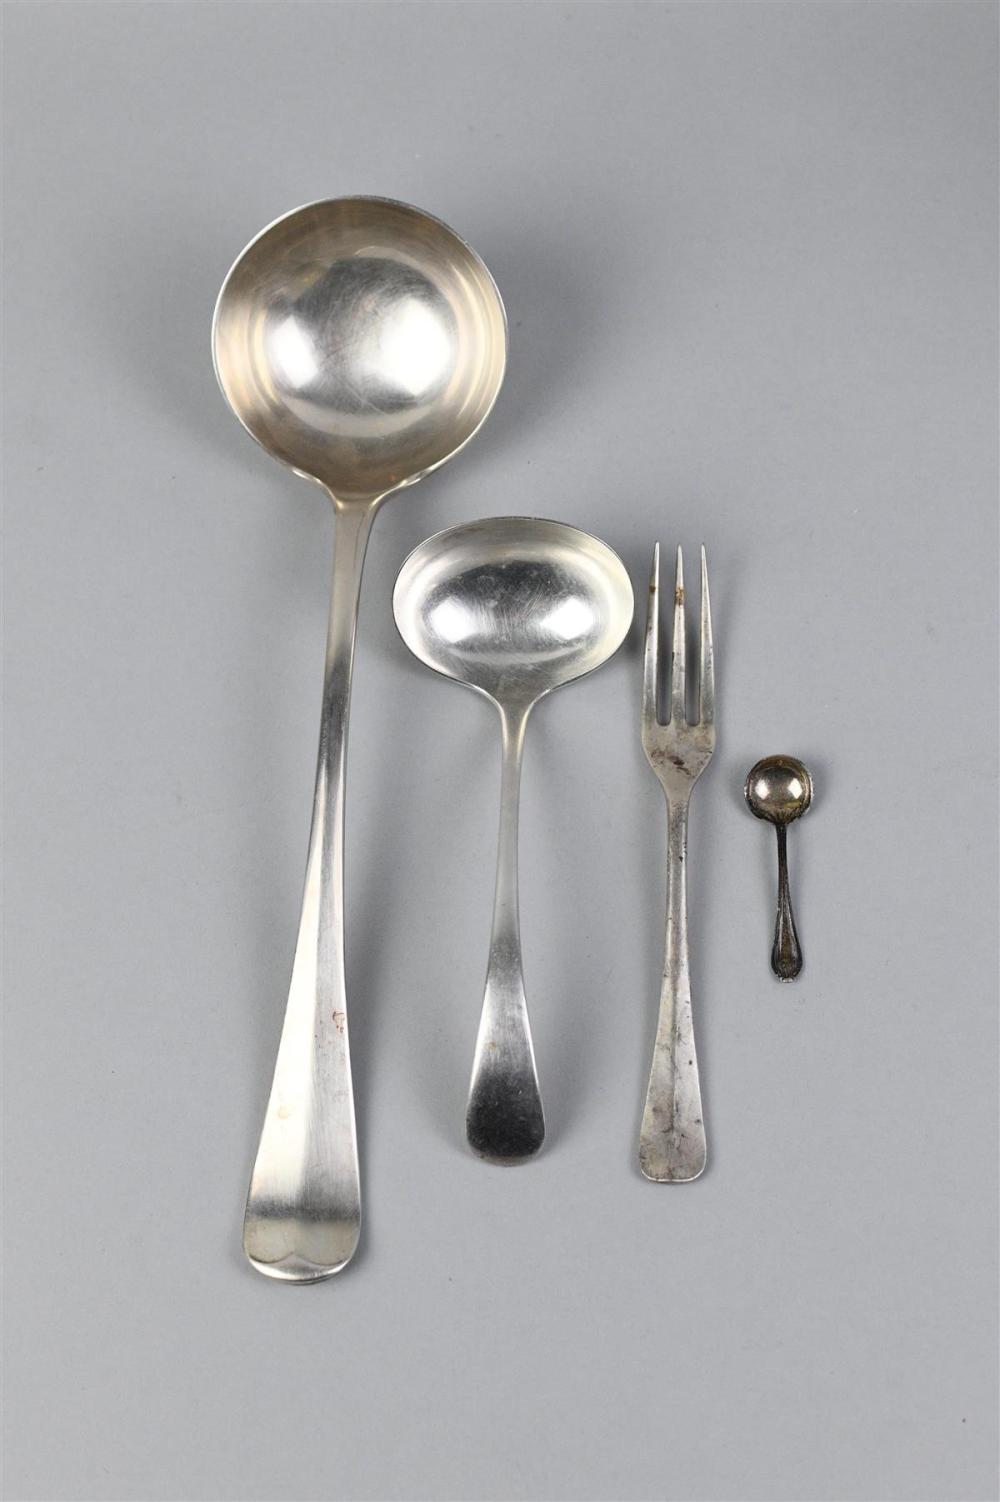 TWO SILVERPLATED LADLES A STIEFF 33b741